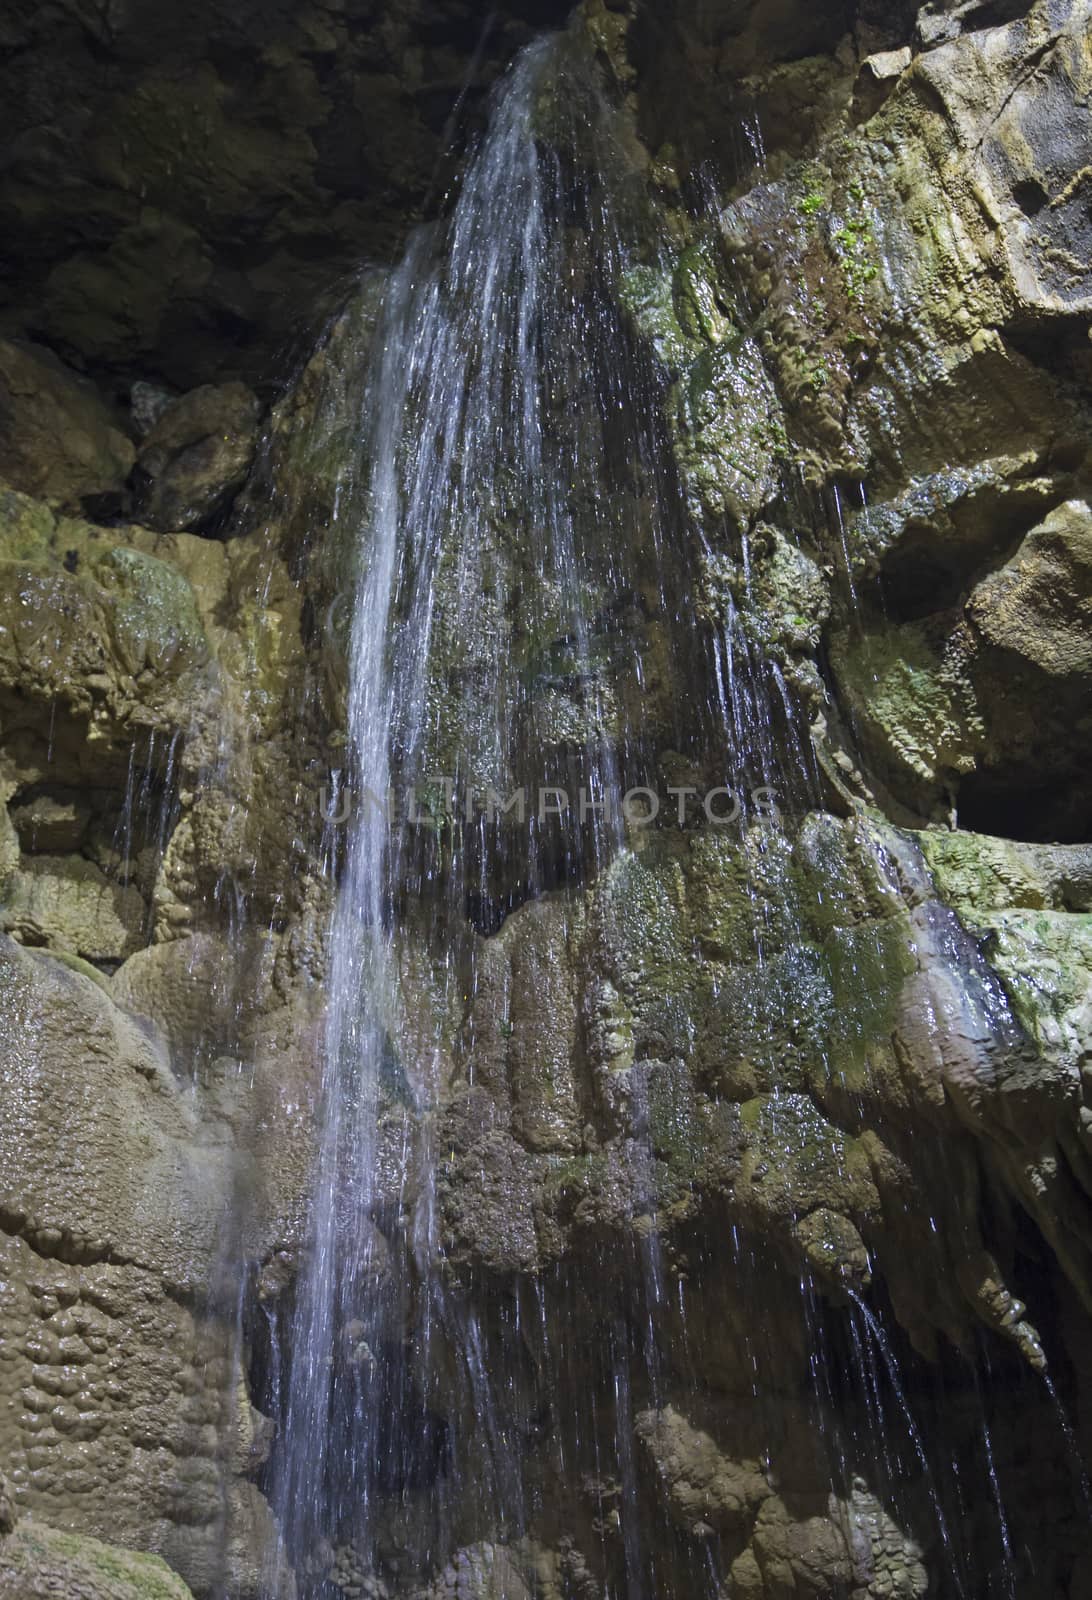 Closeup detail of geological rock formations in underground subterranean limestone cave cavern with waterfall